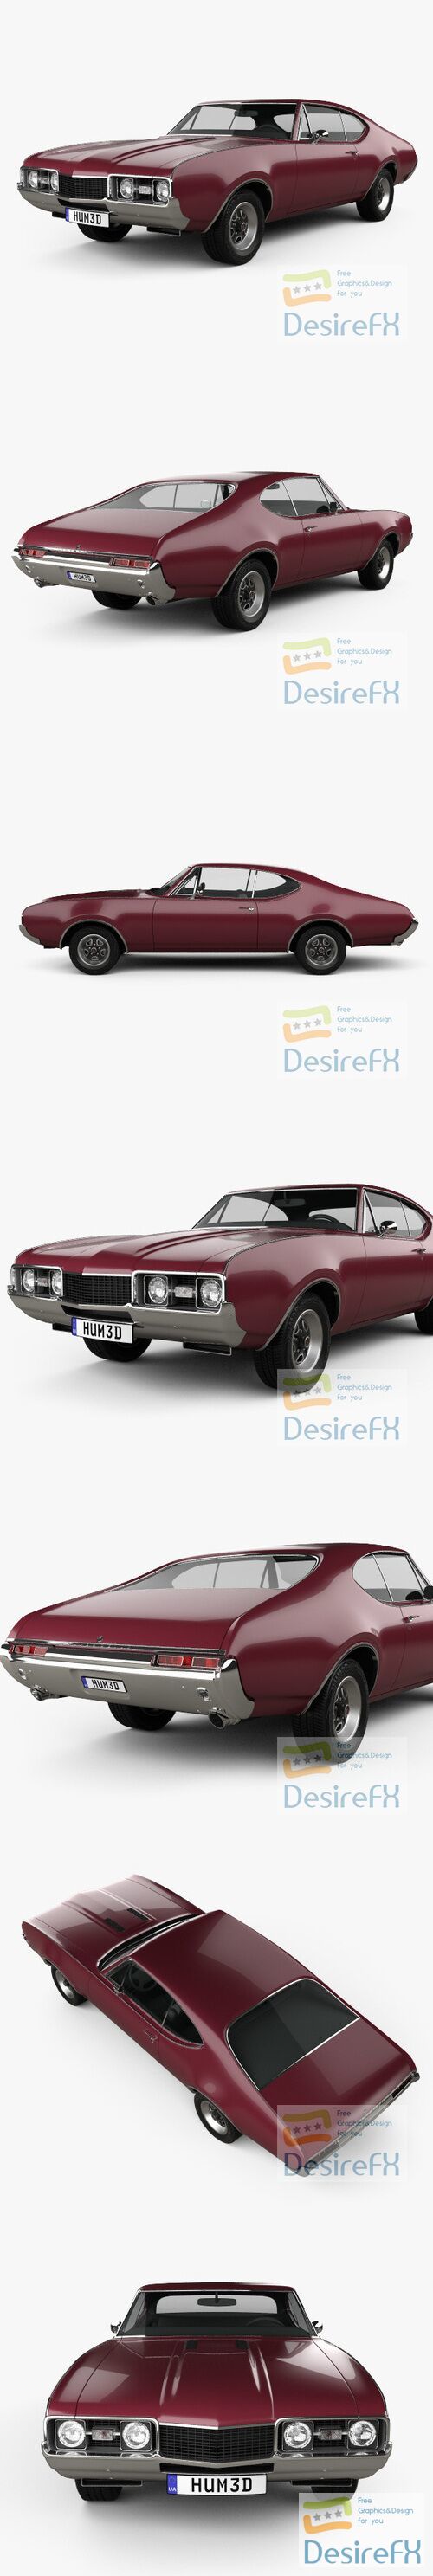 Oldsmobile Cutlass 442 Holiday coupe 1966 3D Model